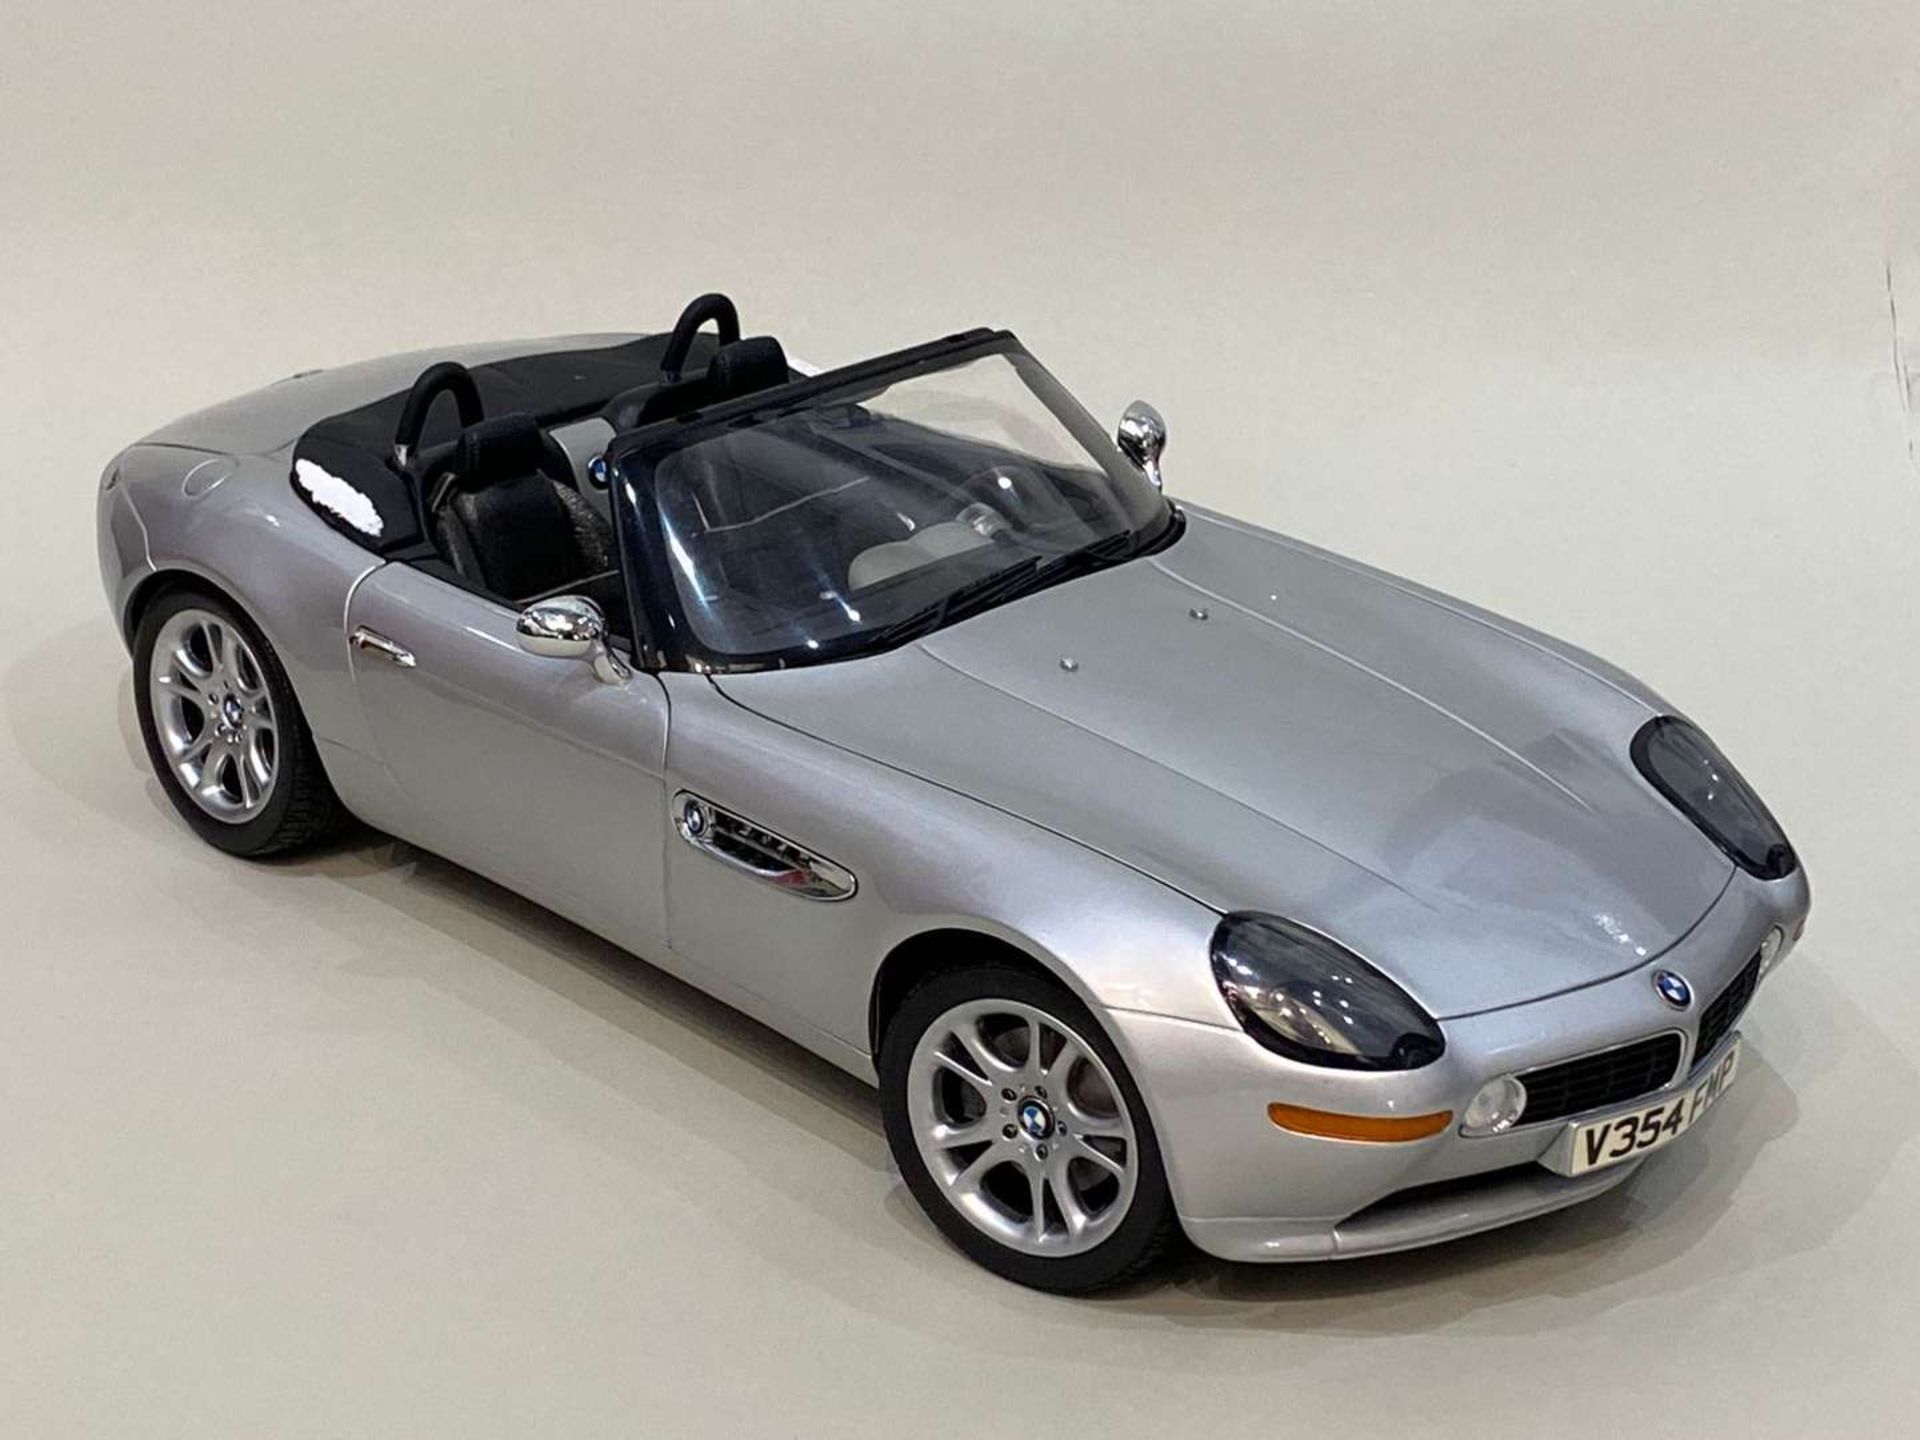 KYOSHO, BMW Z8, James Bond, 007, "The World is Not Enough" 1:12